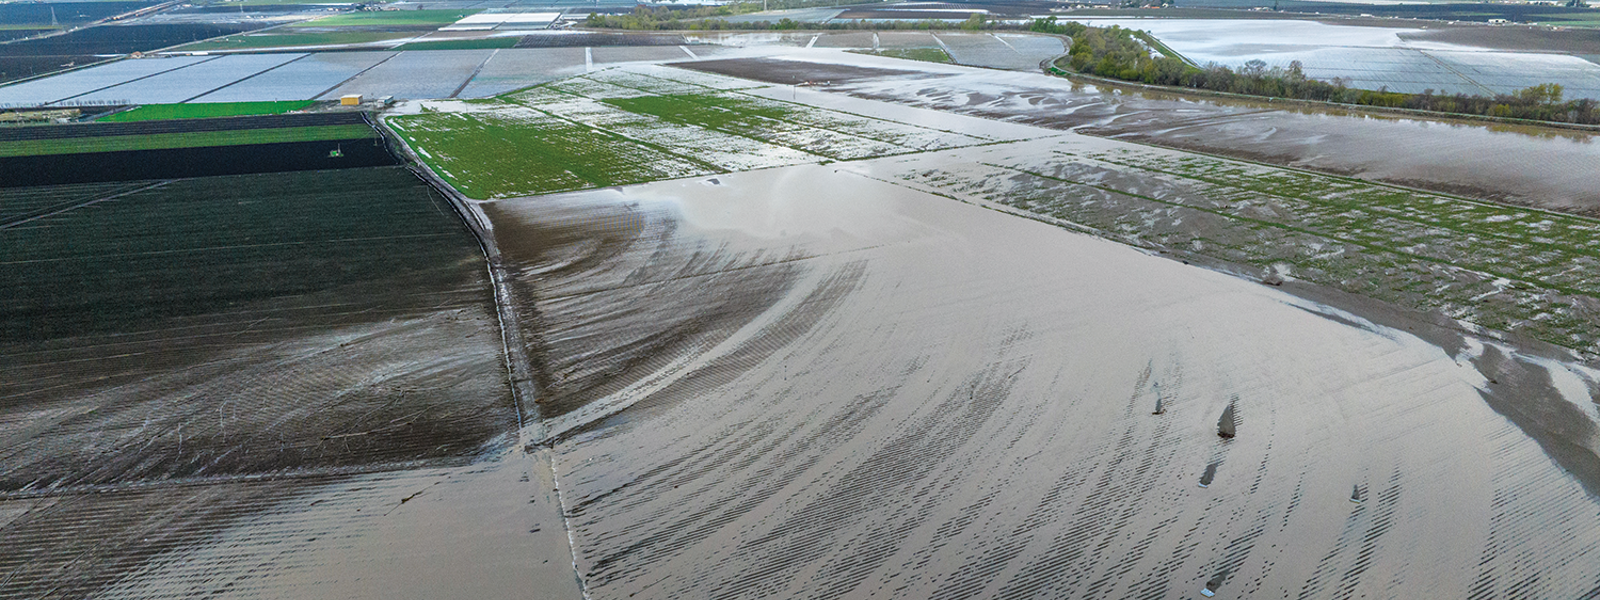 Commentary: Farmers seek solutions for flood-control failures